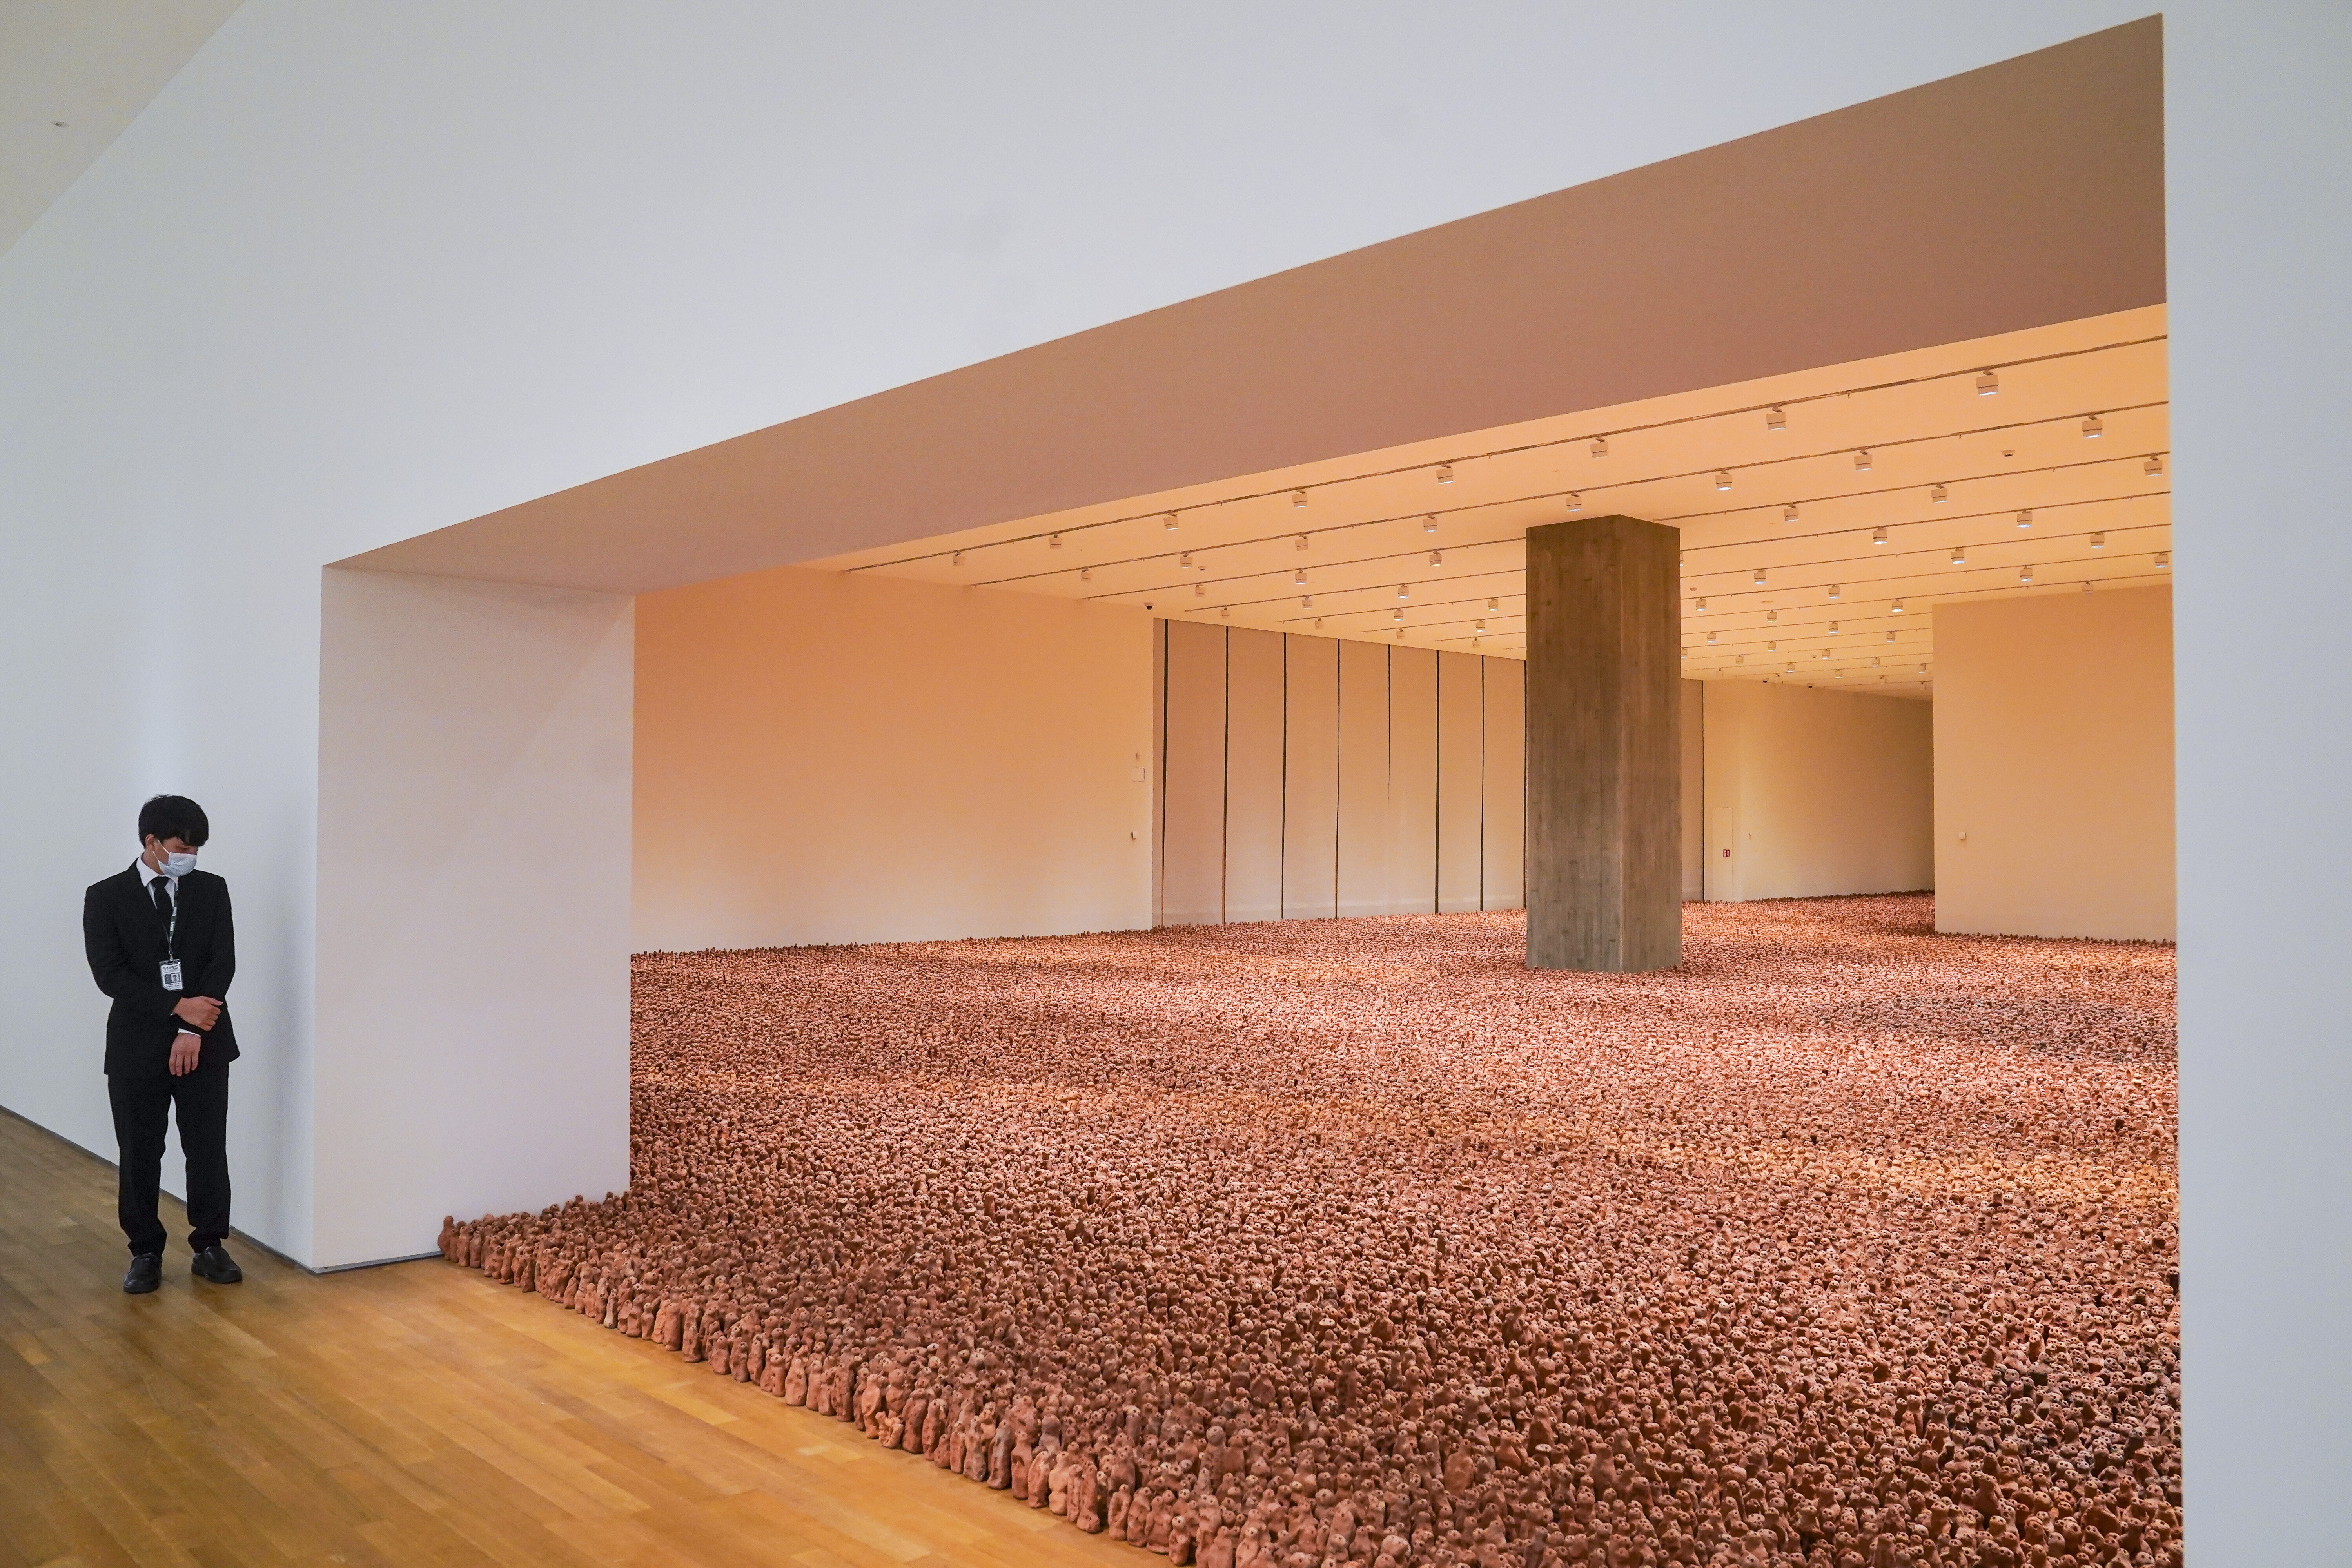 Asian Field, by Antony Gormley, at the M+ museum of visual culture, at West Kowloon Cultural District. Photo: Sam Tsang